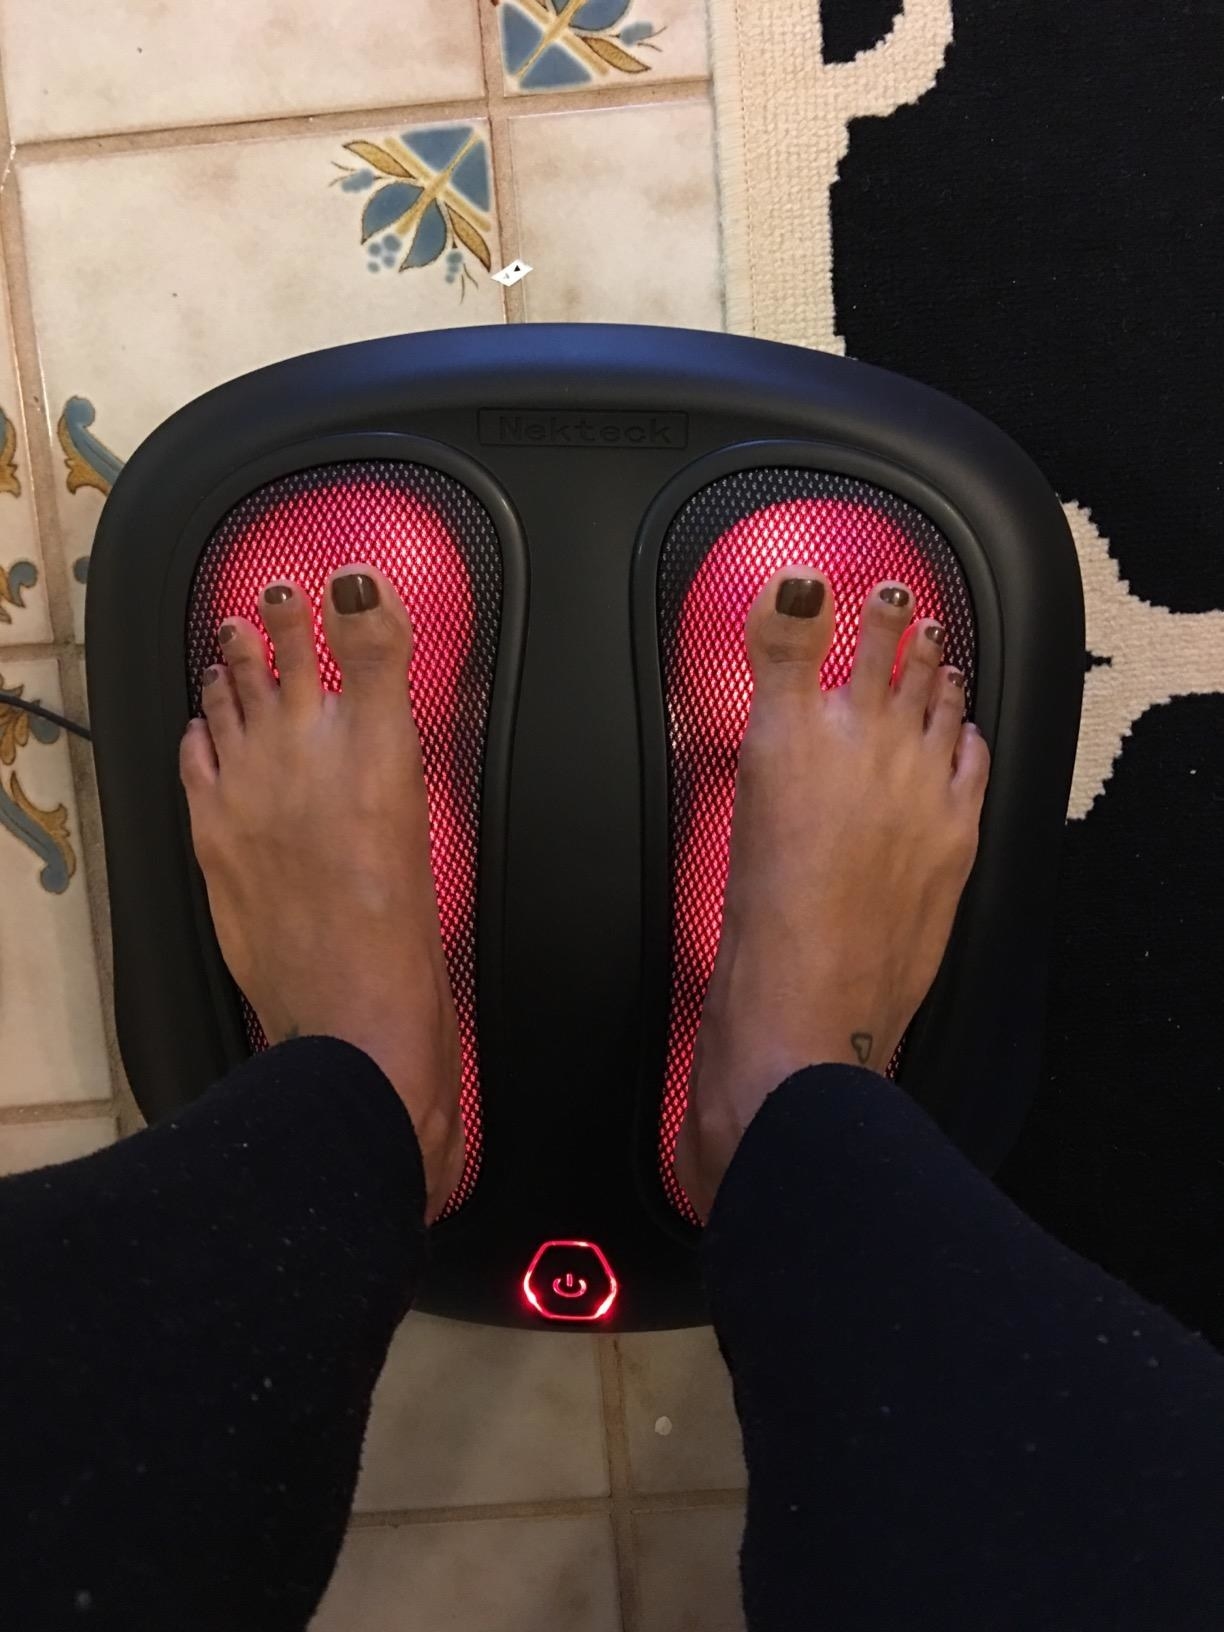 Reviewer with their feet on the massager